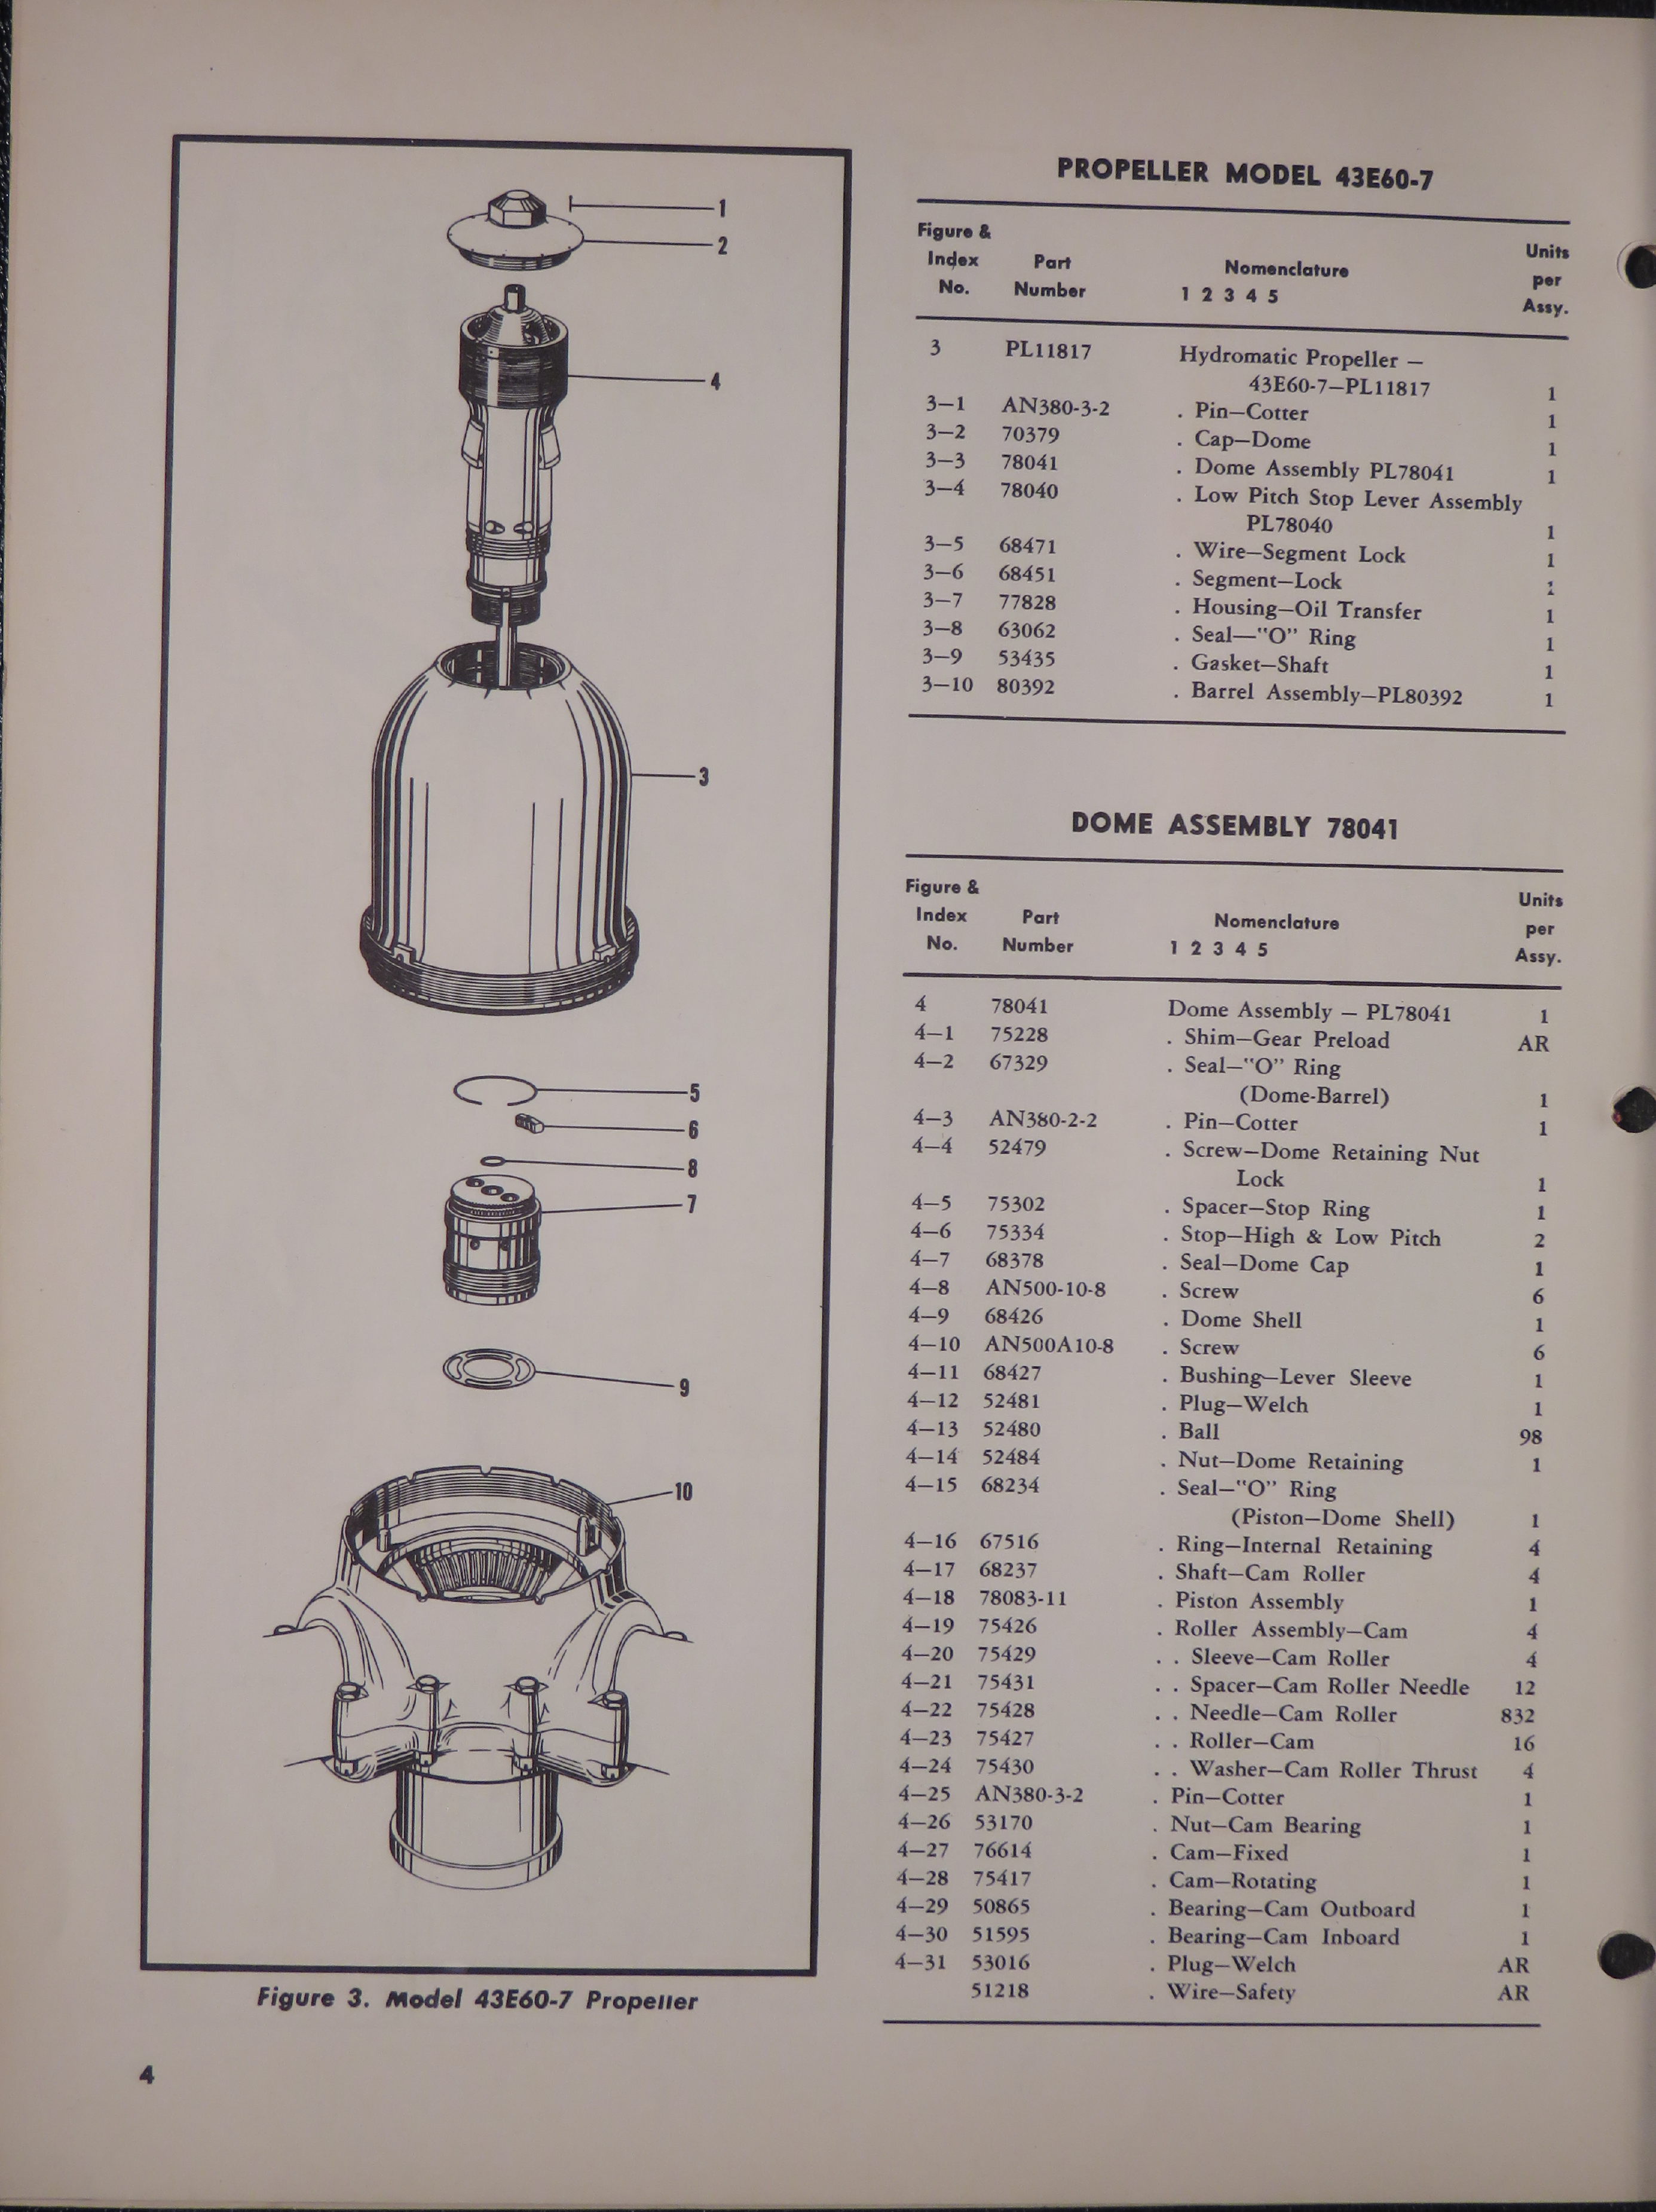 Sample page 6 from AirCorps Library document: Parts Catalog for Hydromatic Propeller Equipment for Martin 404